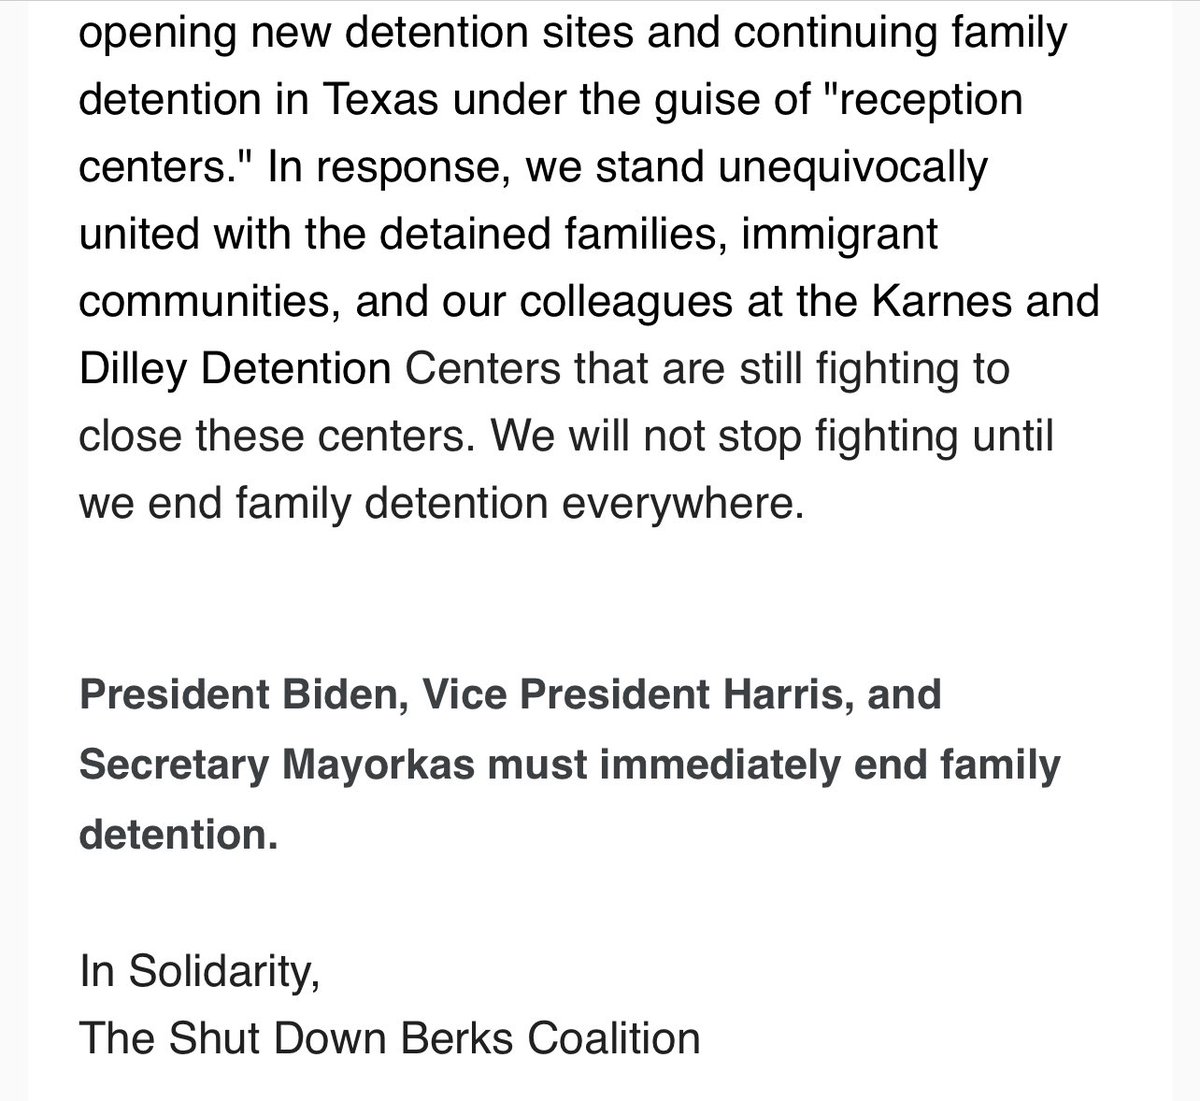 Families are free, but the fight continues. #EndFamilyDetention mailchi.mp/33ce7b4b61ea/f…